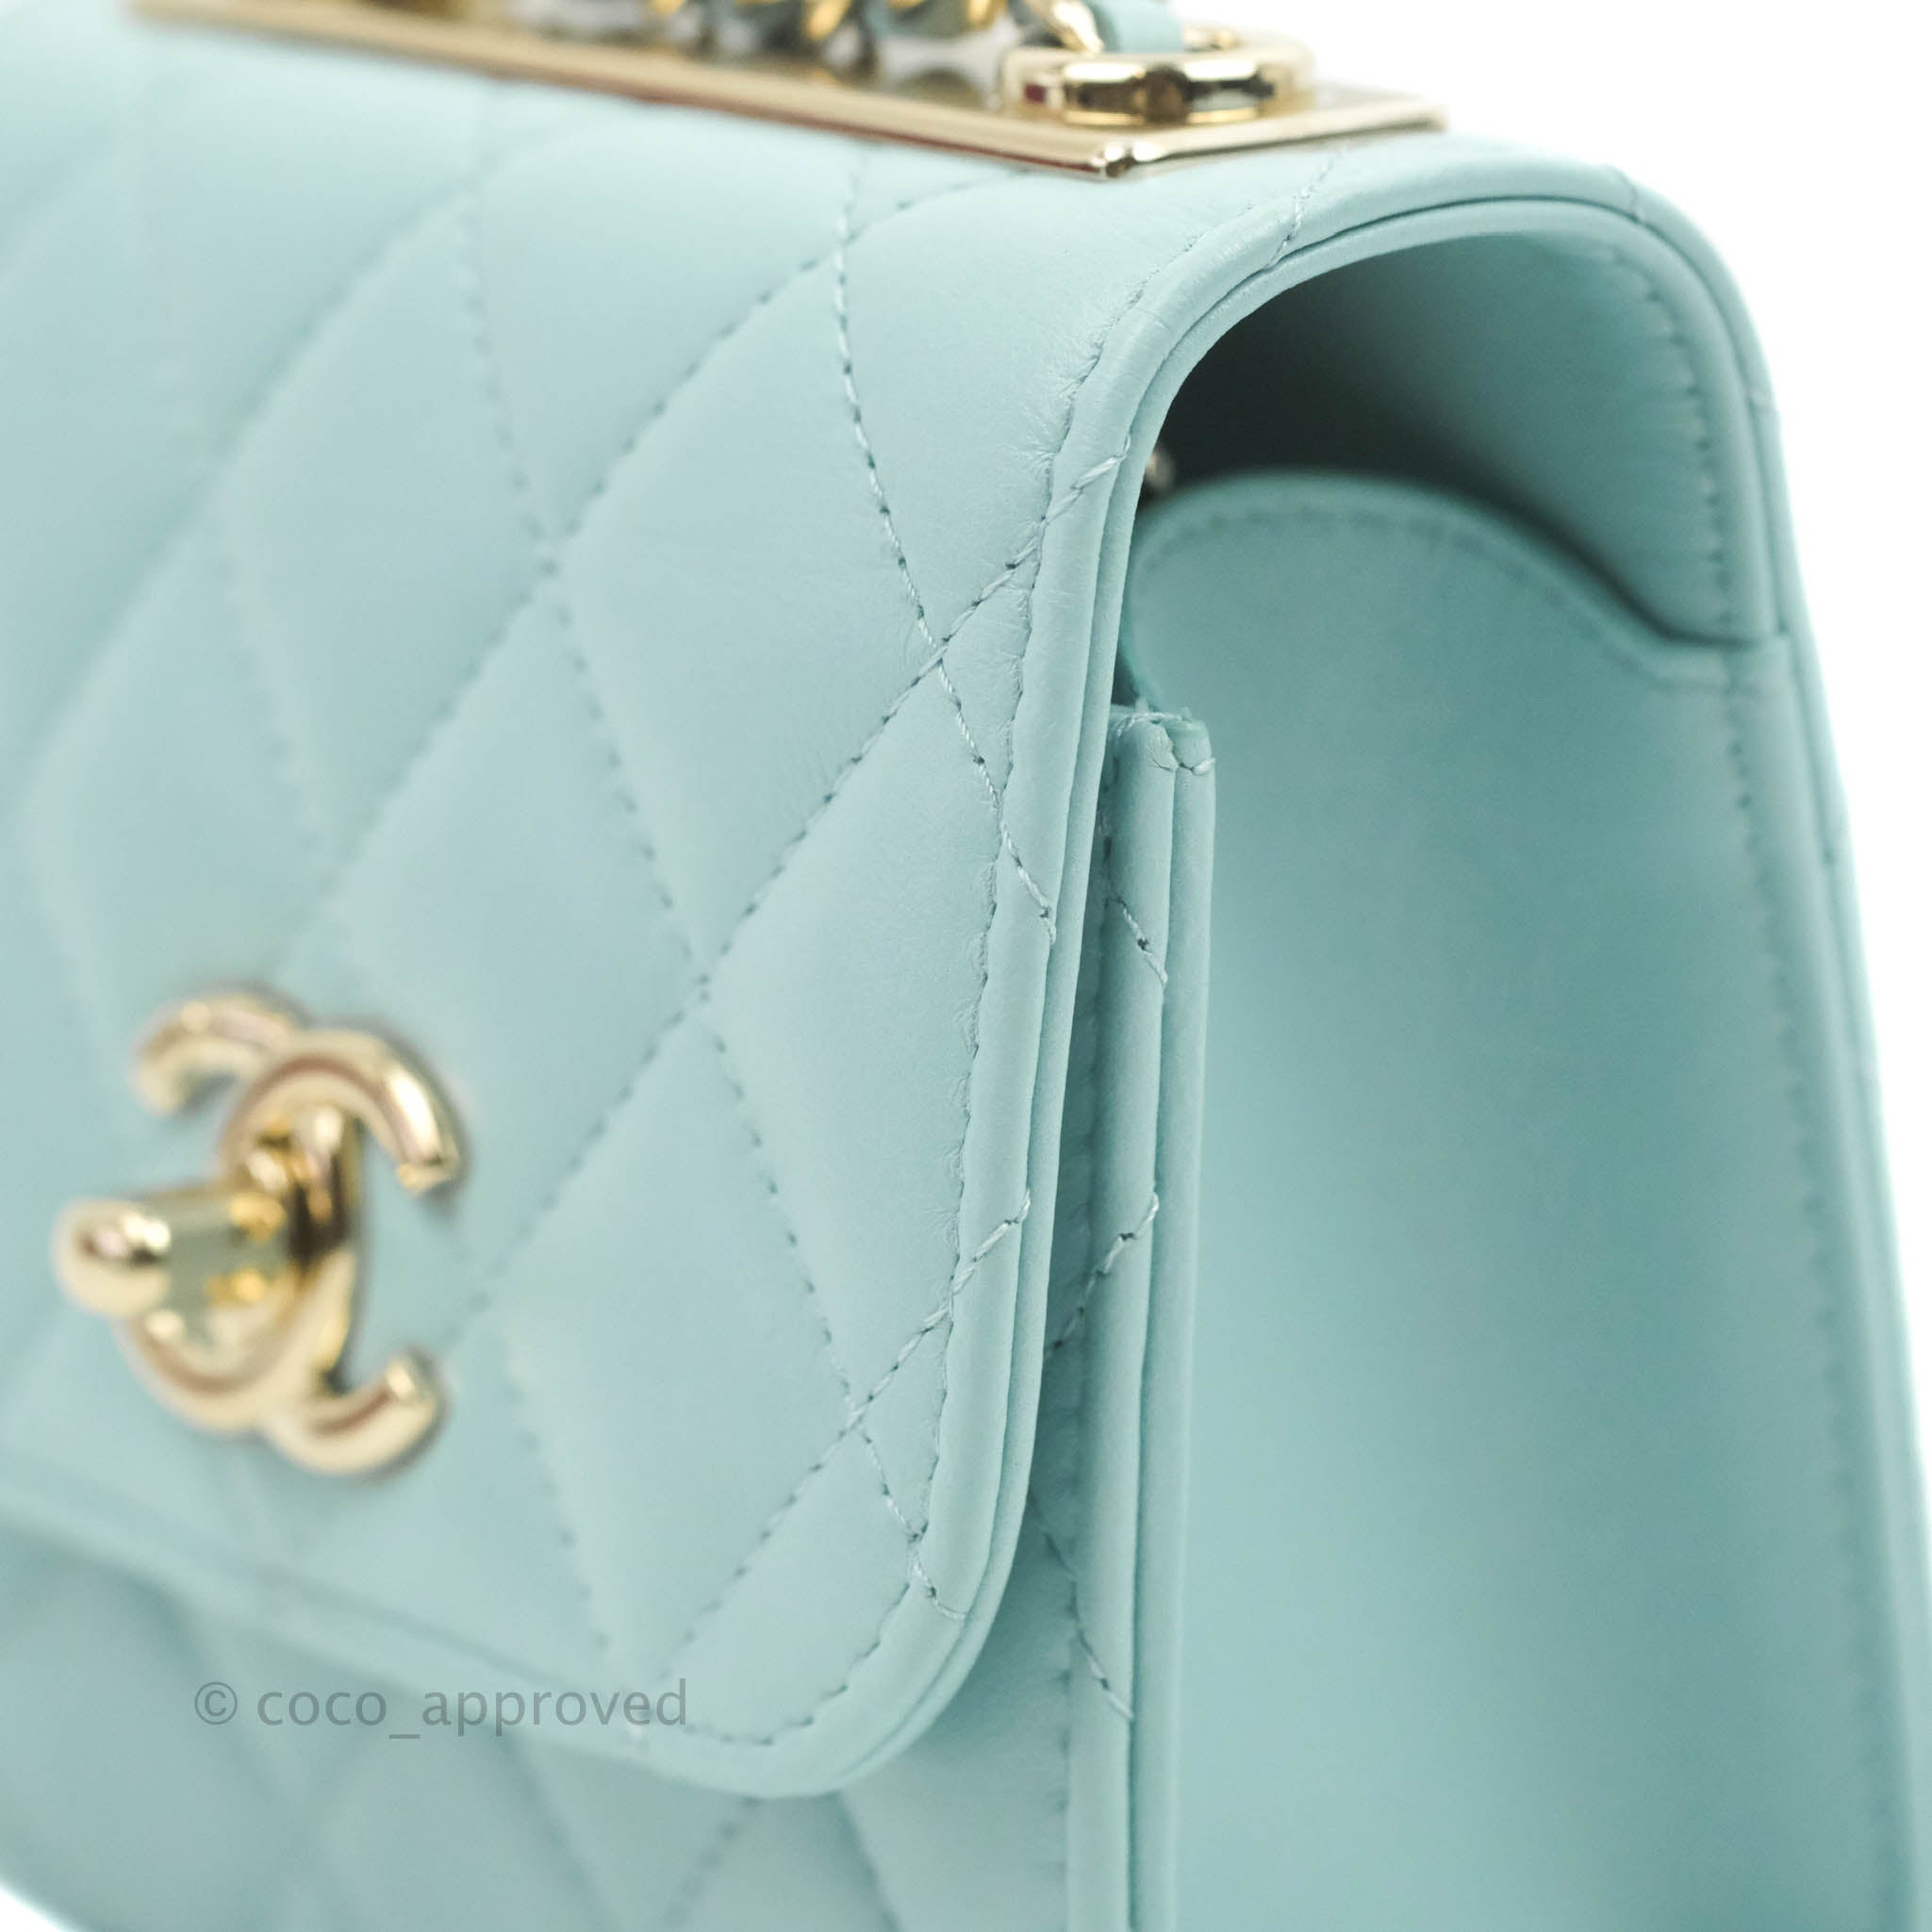 Chanel Mini Quilted Trendy CC Clutch With Chain Tiffany Blue